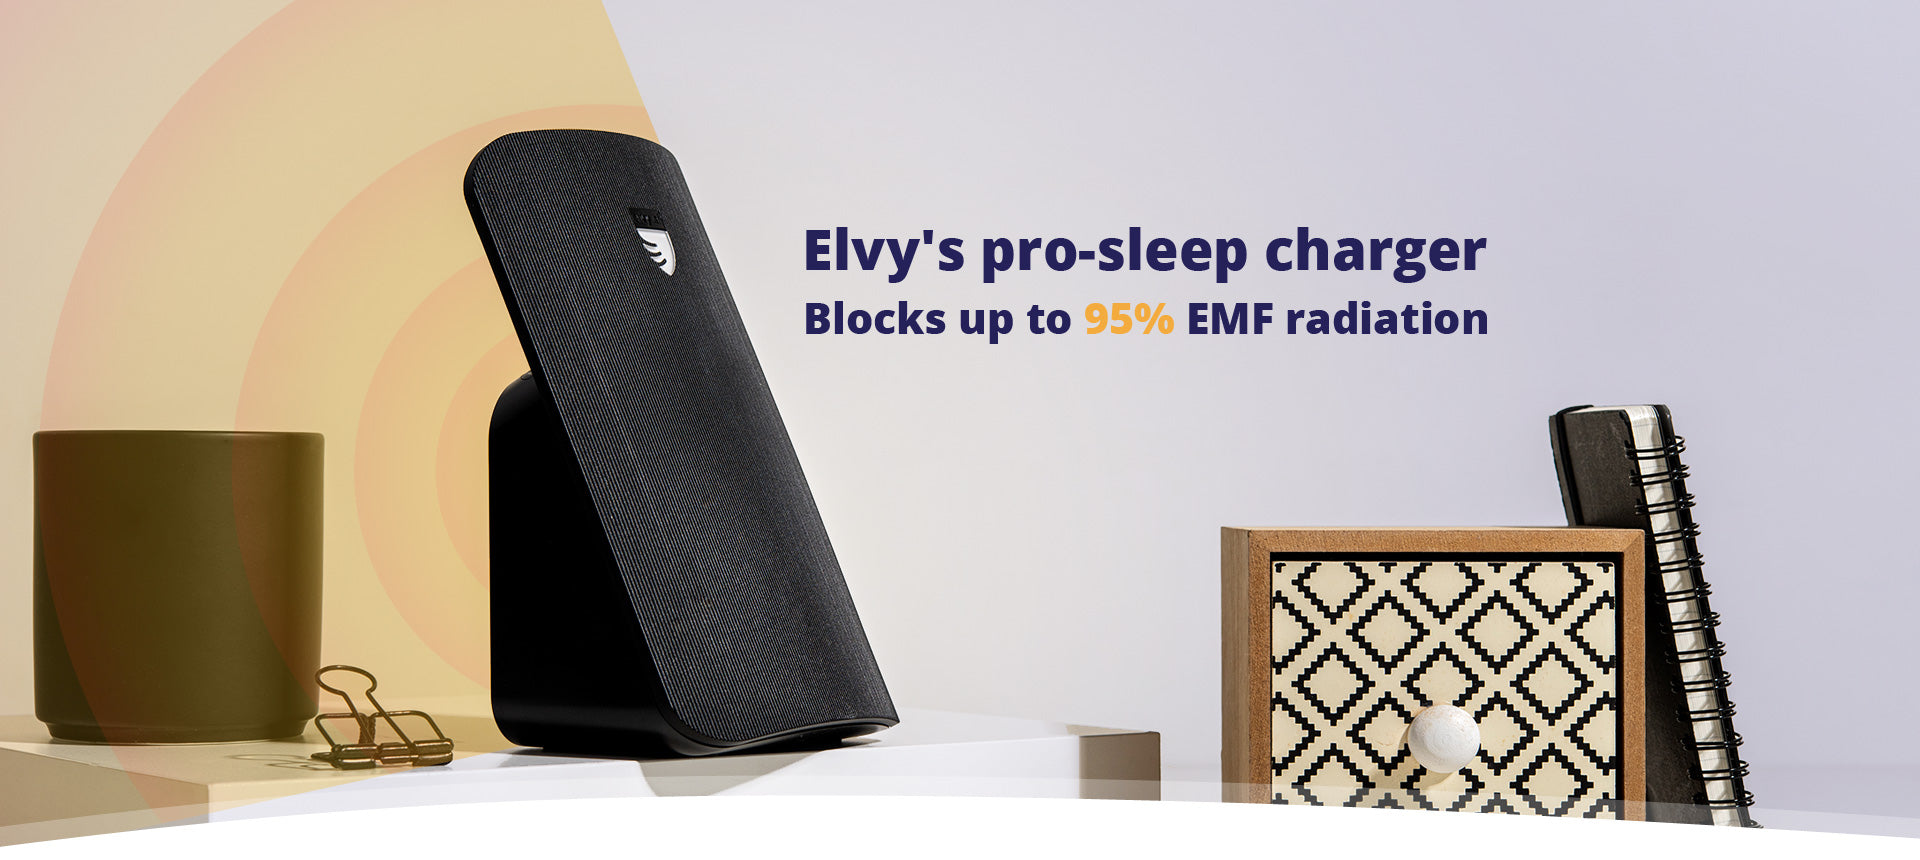 Elvy radiation-blocking phone charger can effectively block 95% of EMF  radiation » Gadget Flow